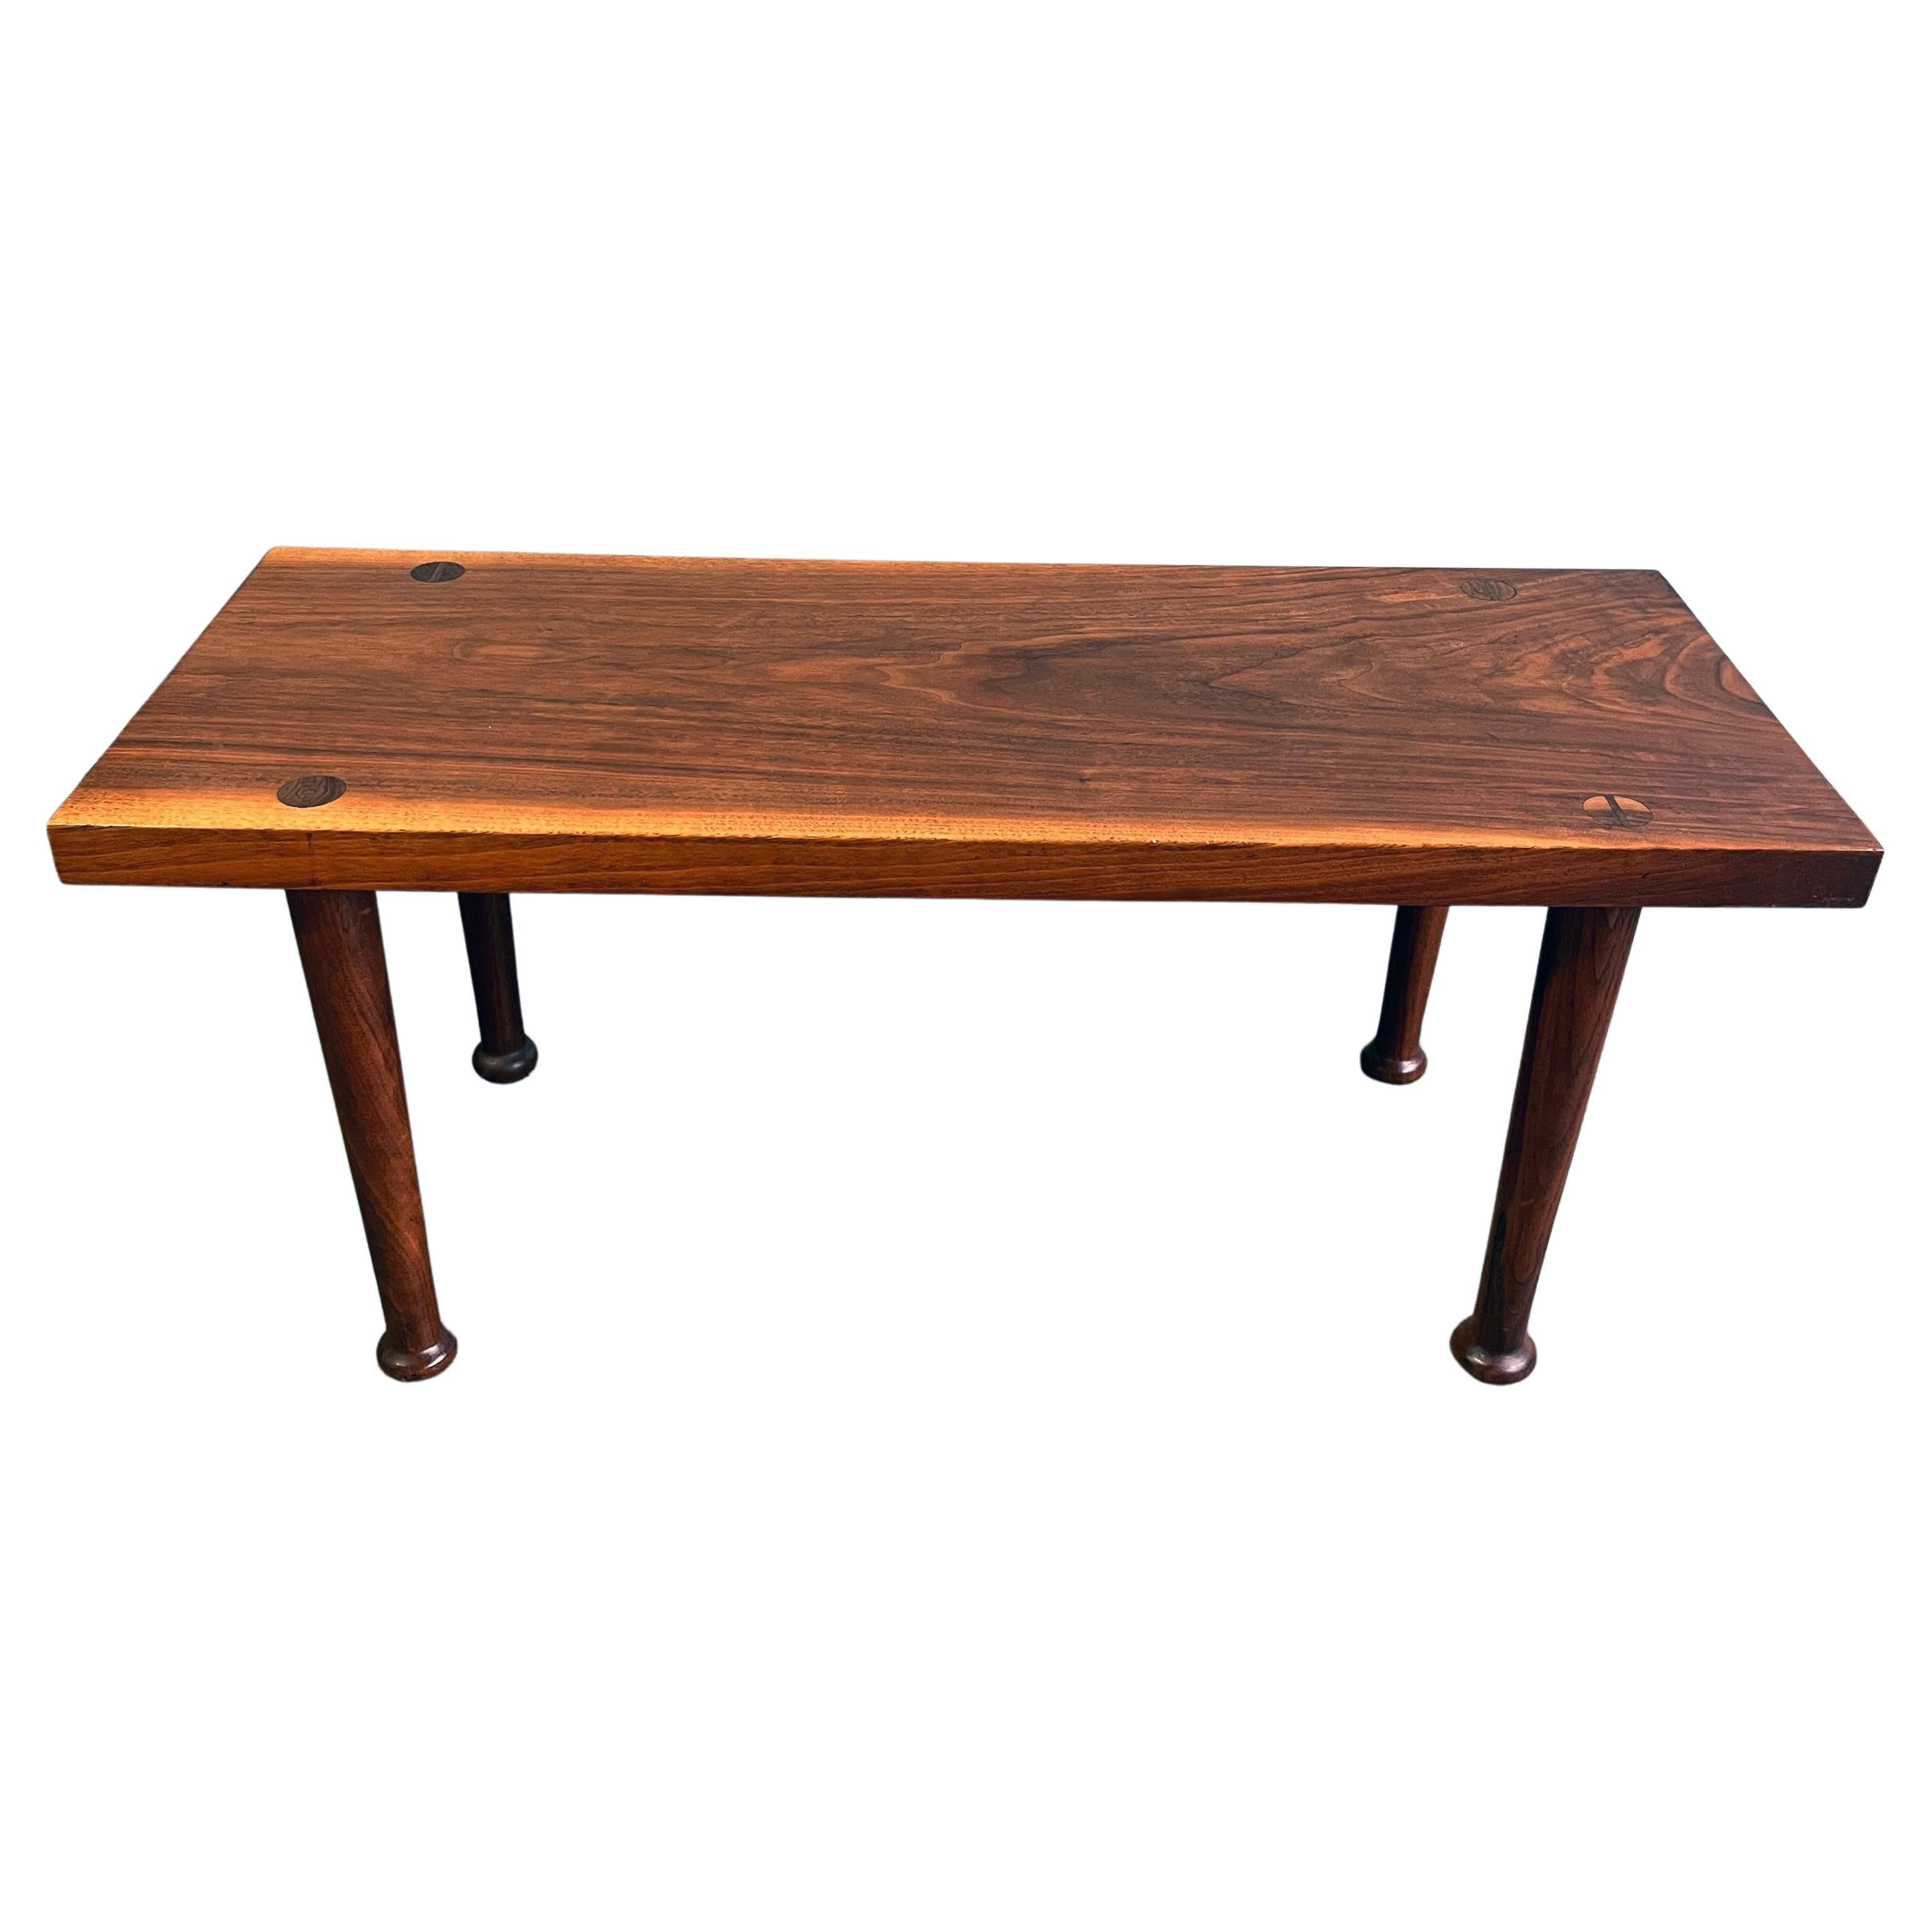 20th Century American Studio Craft Walnut Bench or Coffee Table Phillip Powell For Sale